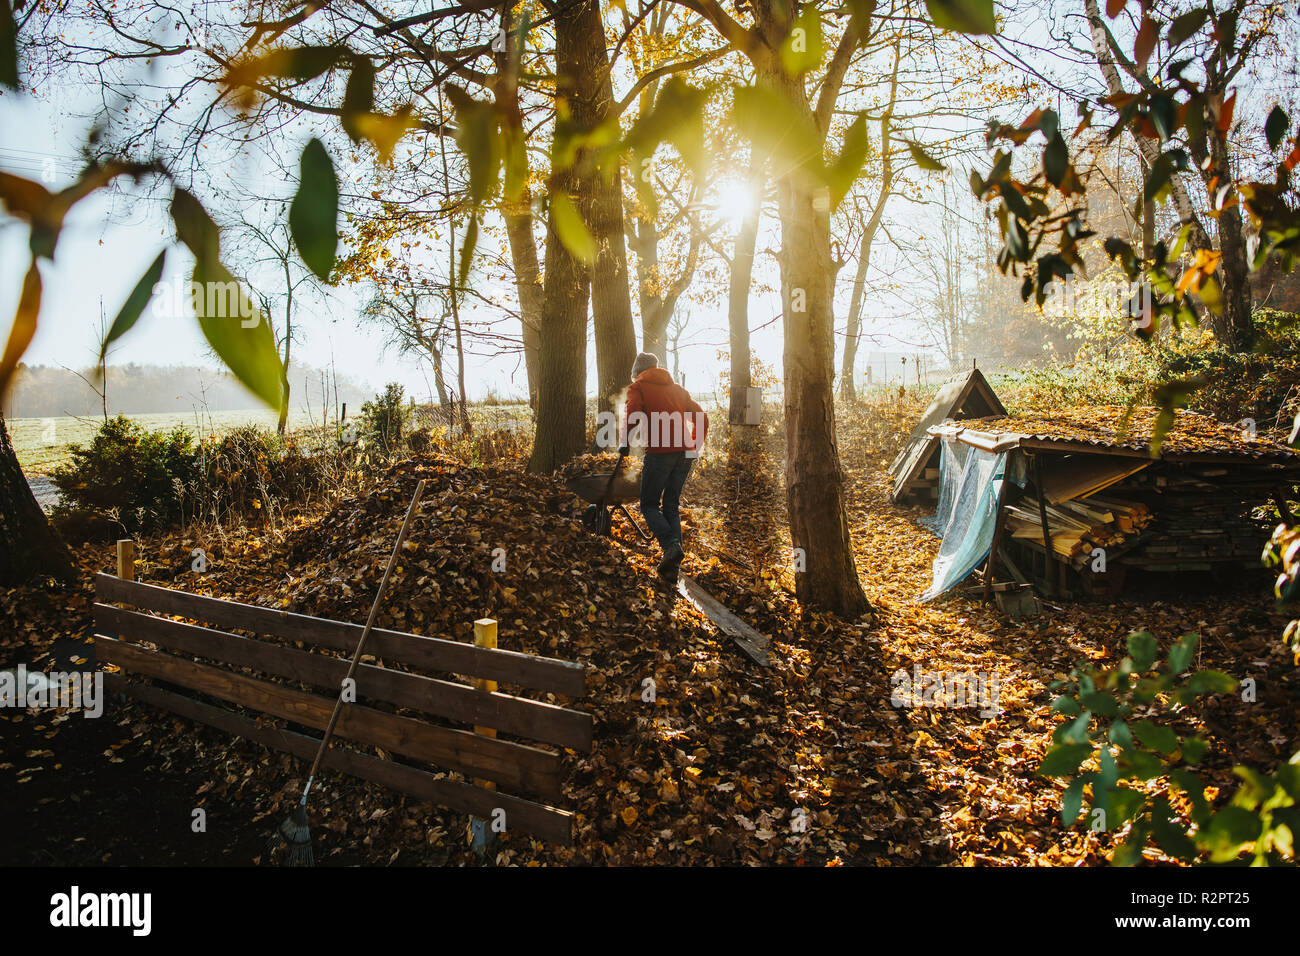 photo of caucasian man wearing a red jacket who is pushing a wheelbarrow full of leaves up a pile of foliage Stock Photo